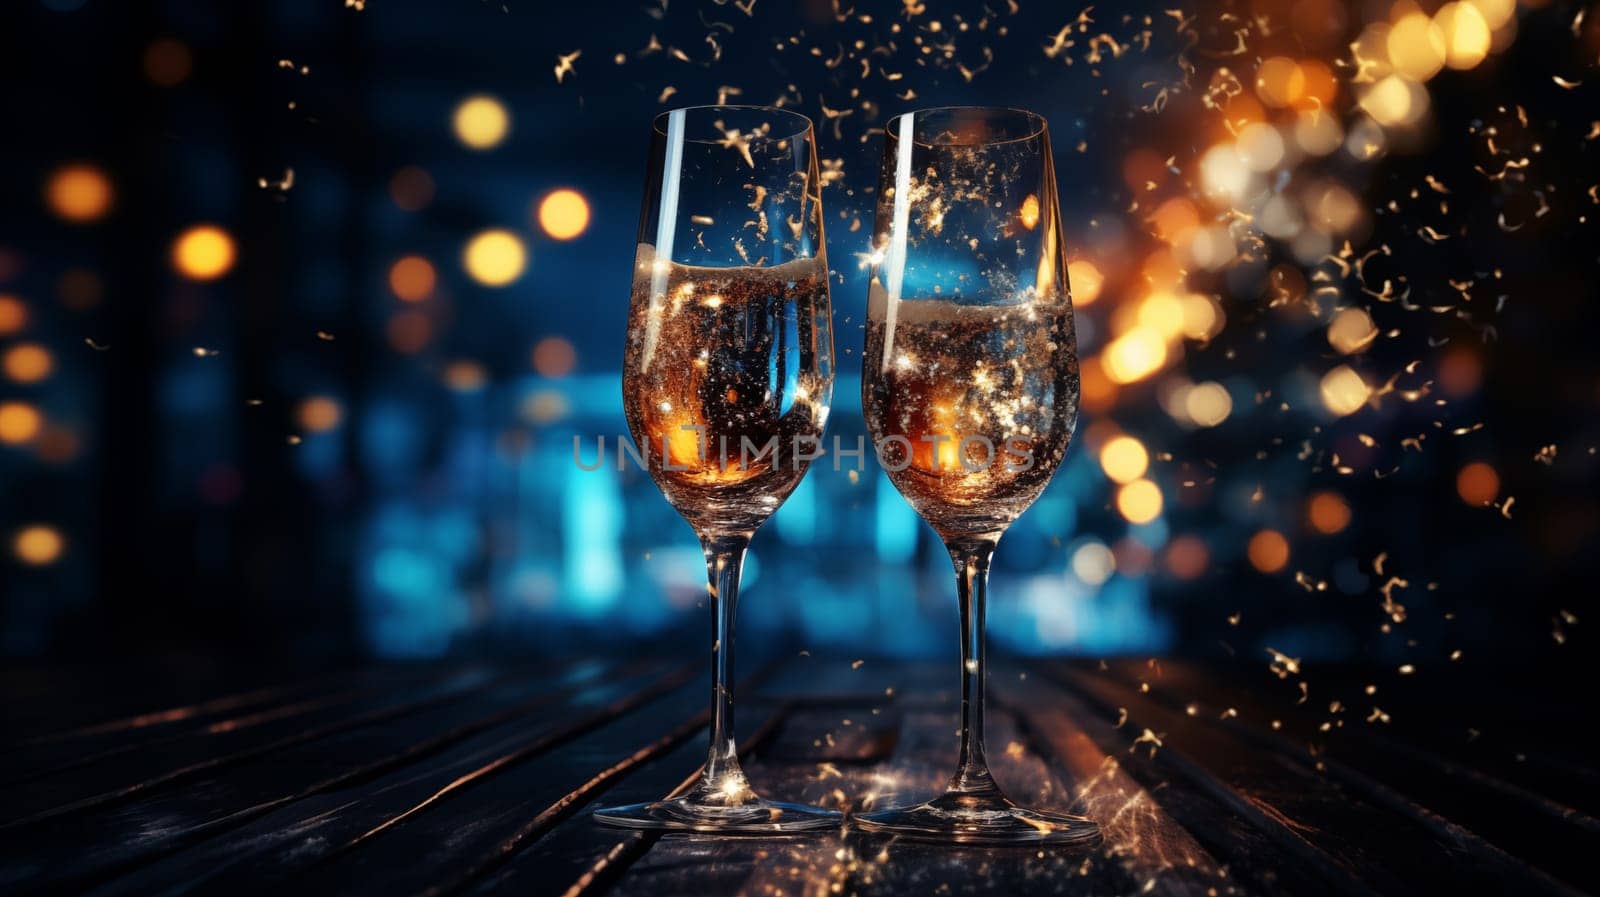 In the semi-darkness on the table there are two glasses of champagne with gold particles inside, surrounded by golden bokeh lights.